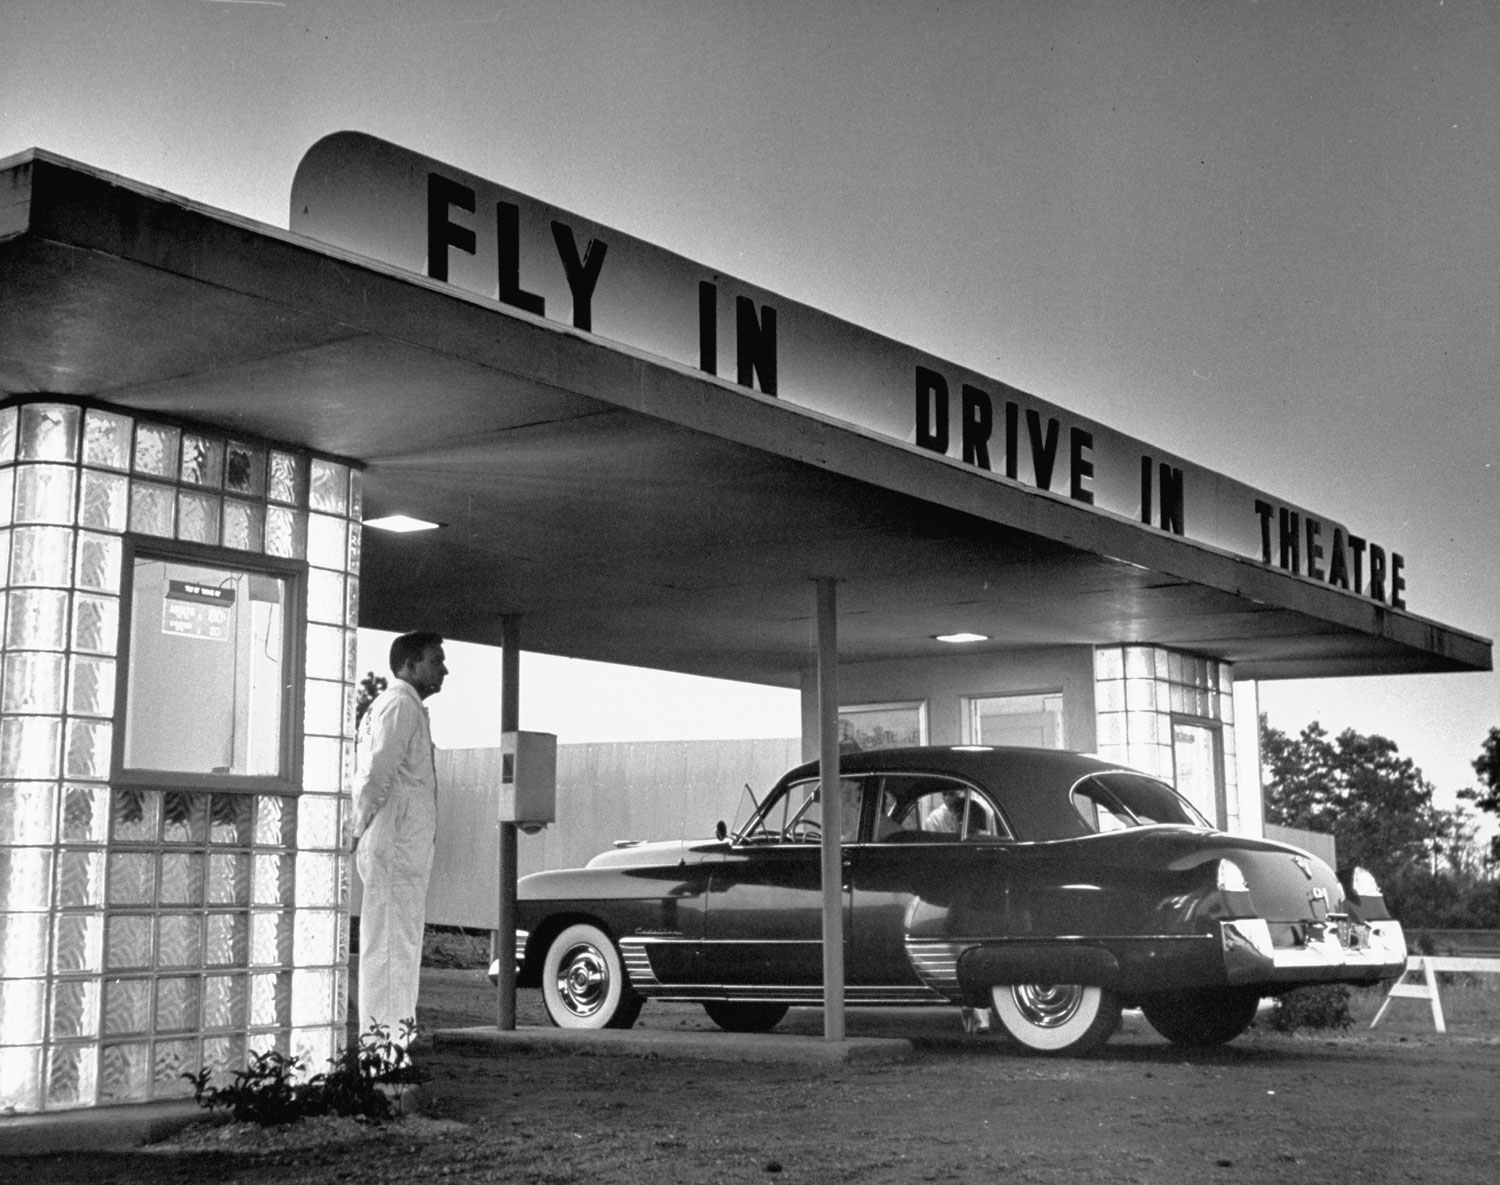 Customers arriving by car at a "fly-in drive-in" theater, New Jersey, 1949.